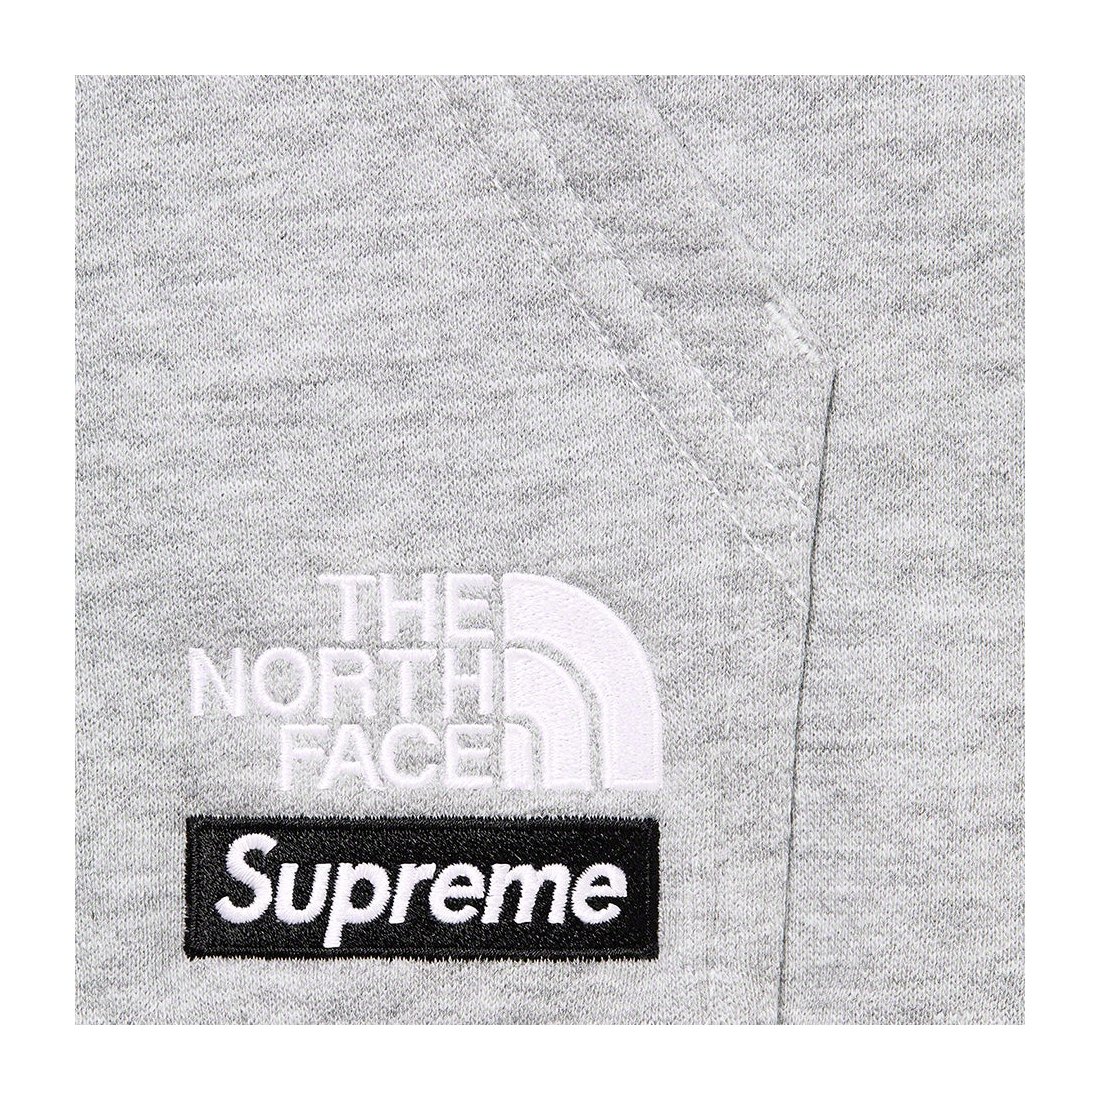 Details on Supreme The North Face Convertible Hooded Sweatshirt Heather Grey from spring summer 2023 (Price is $148)